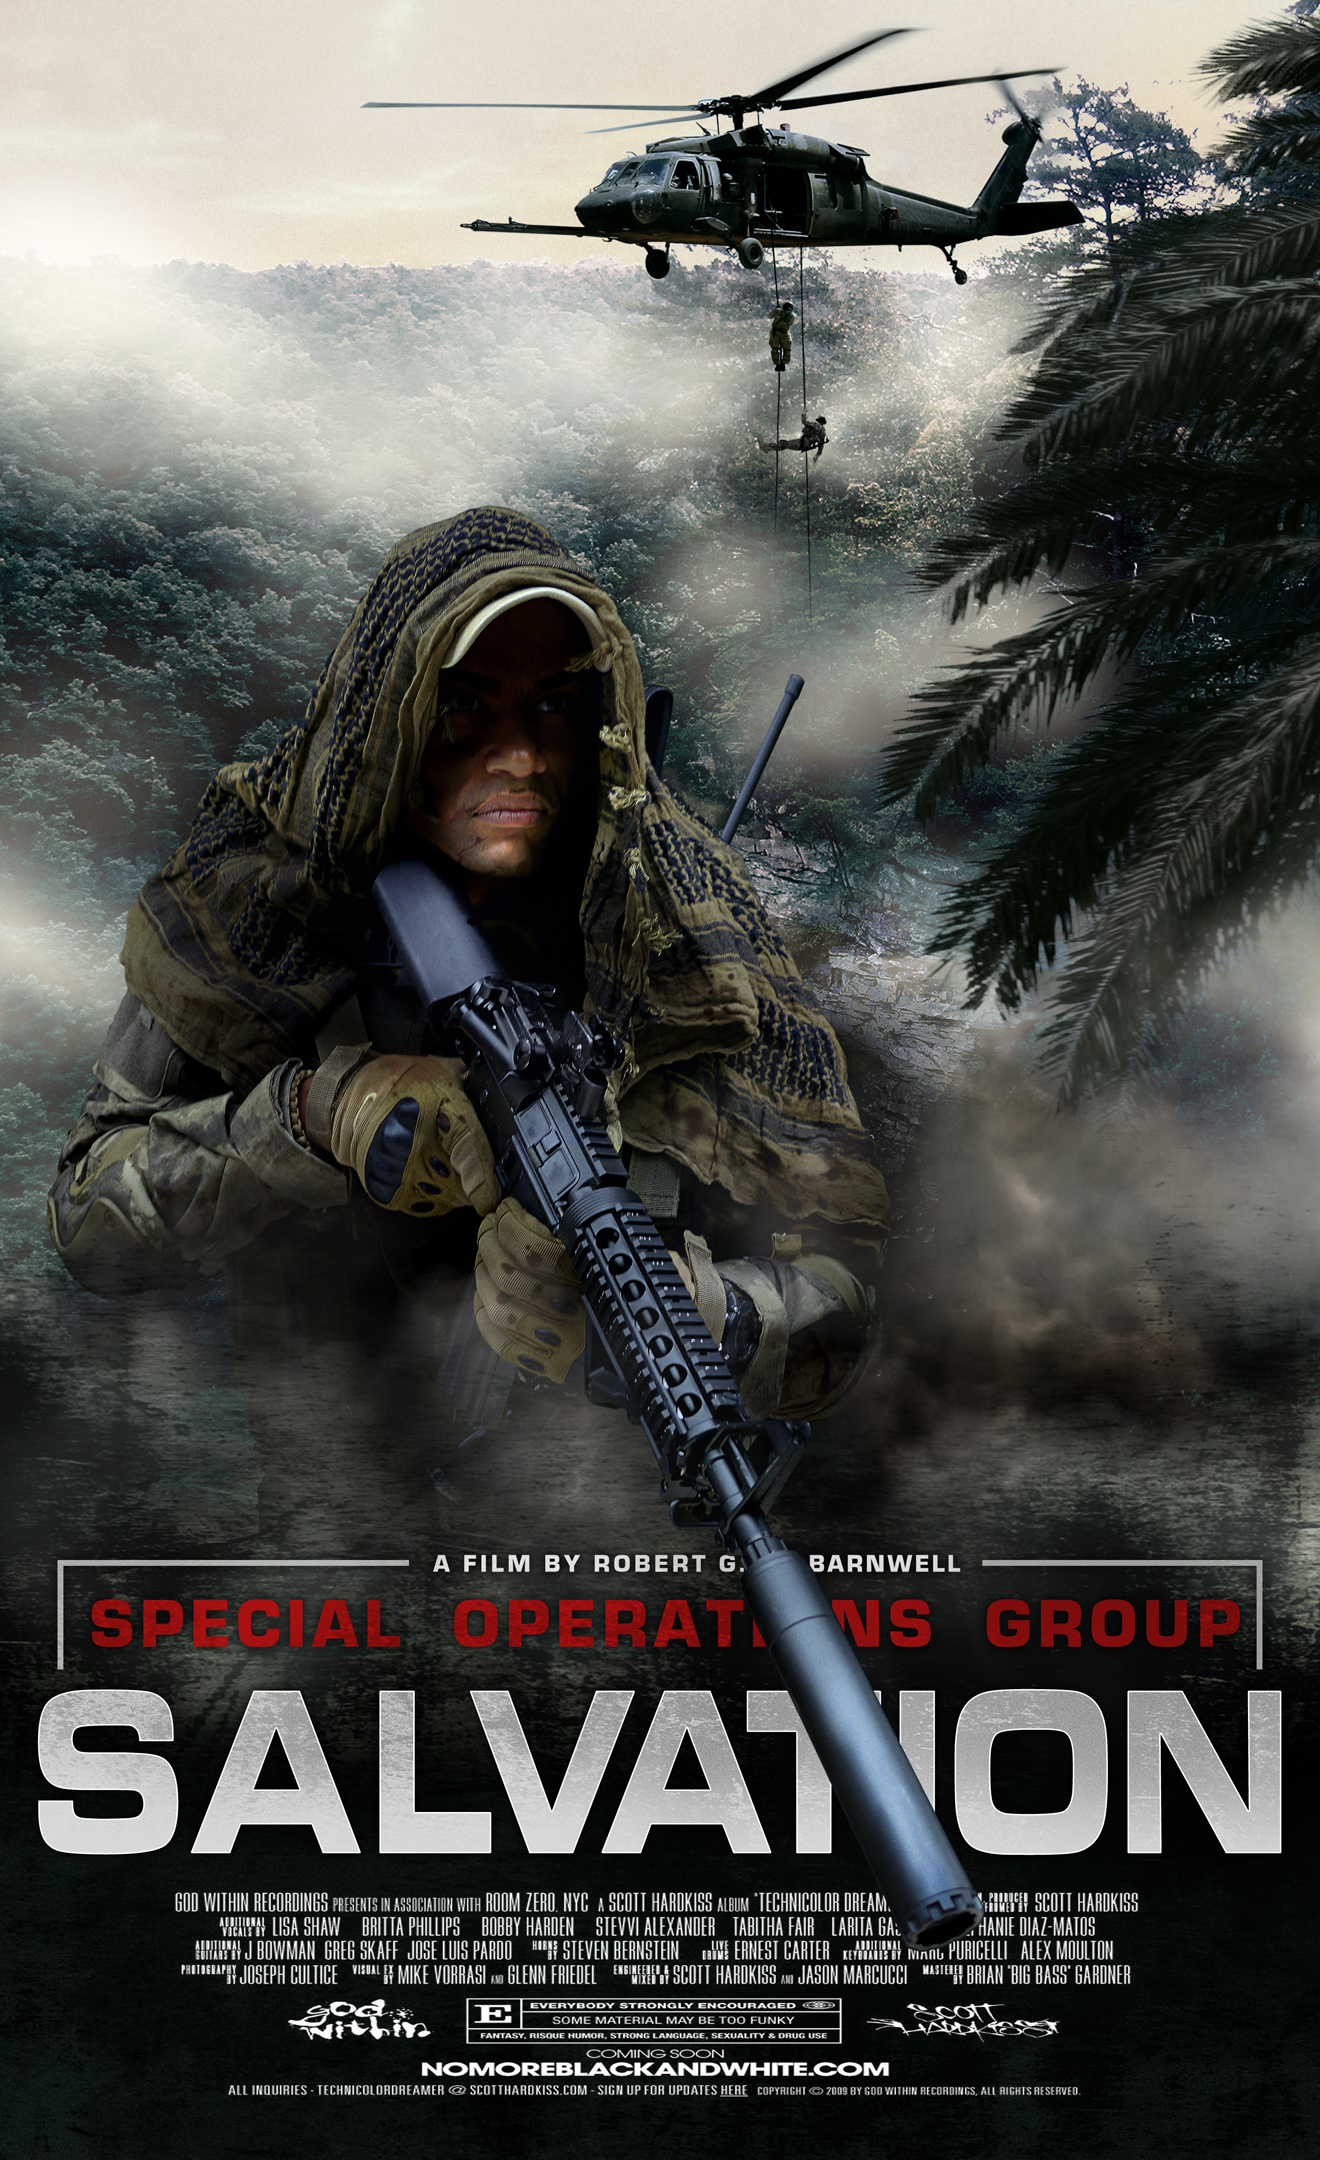 Special Operations Group: SALVATION. Release: Winter 2014.